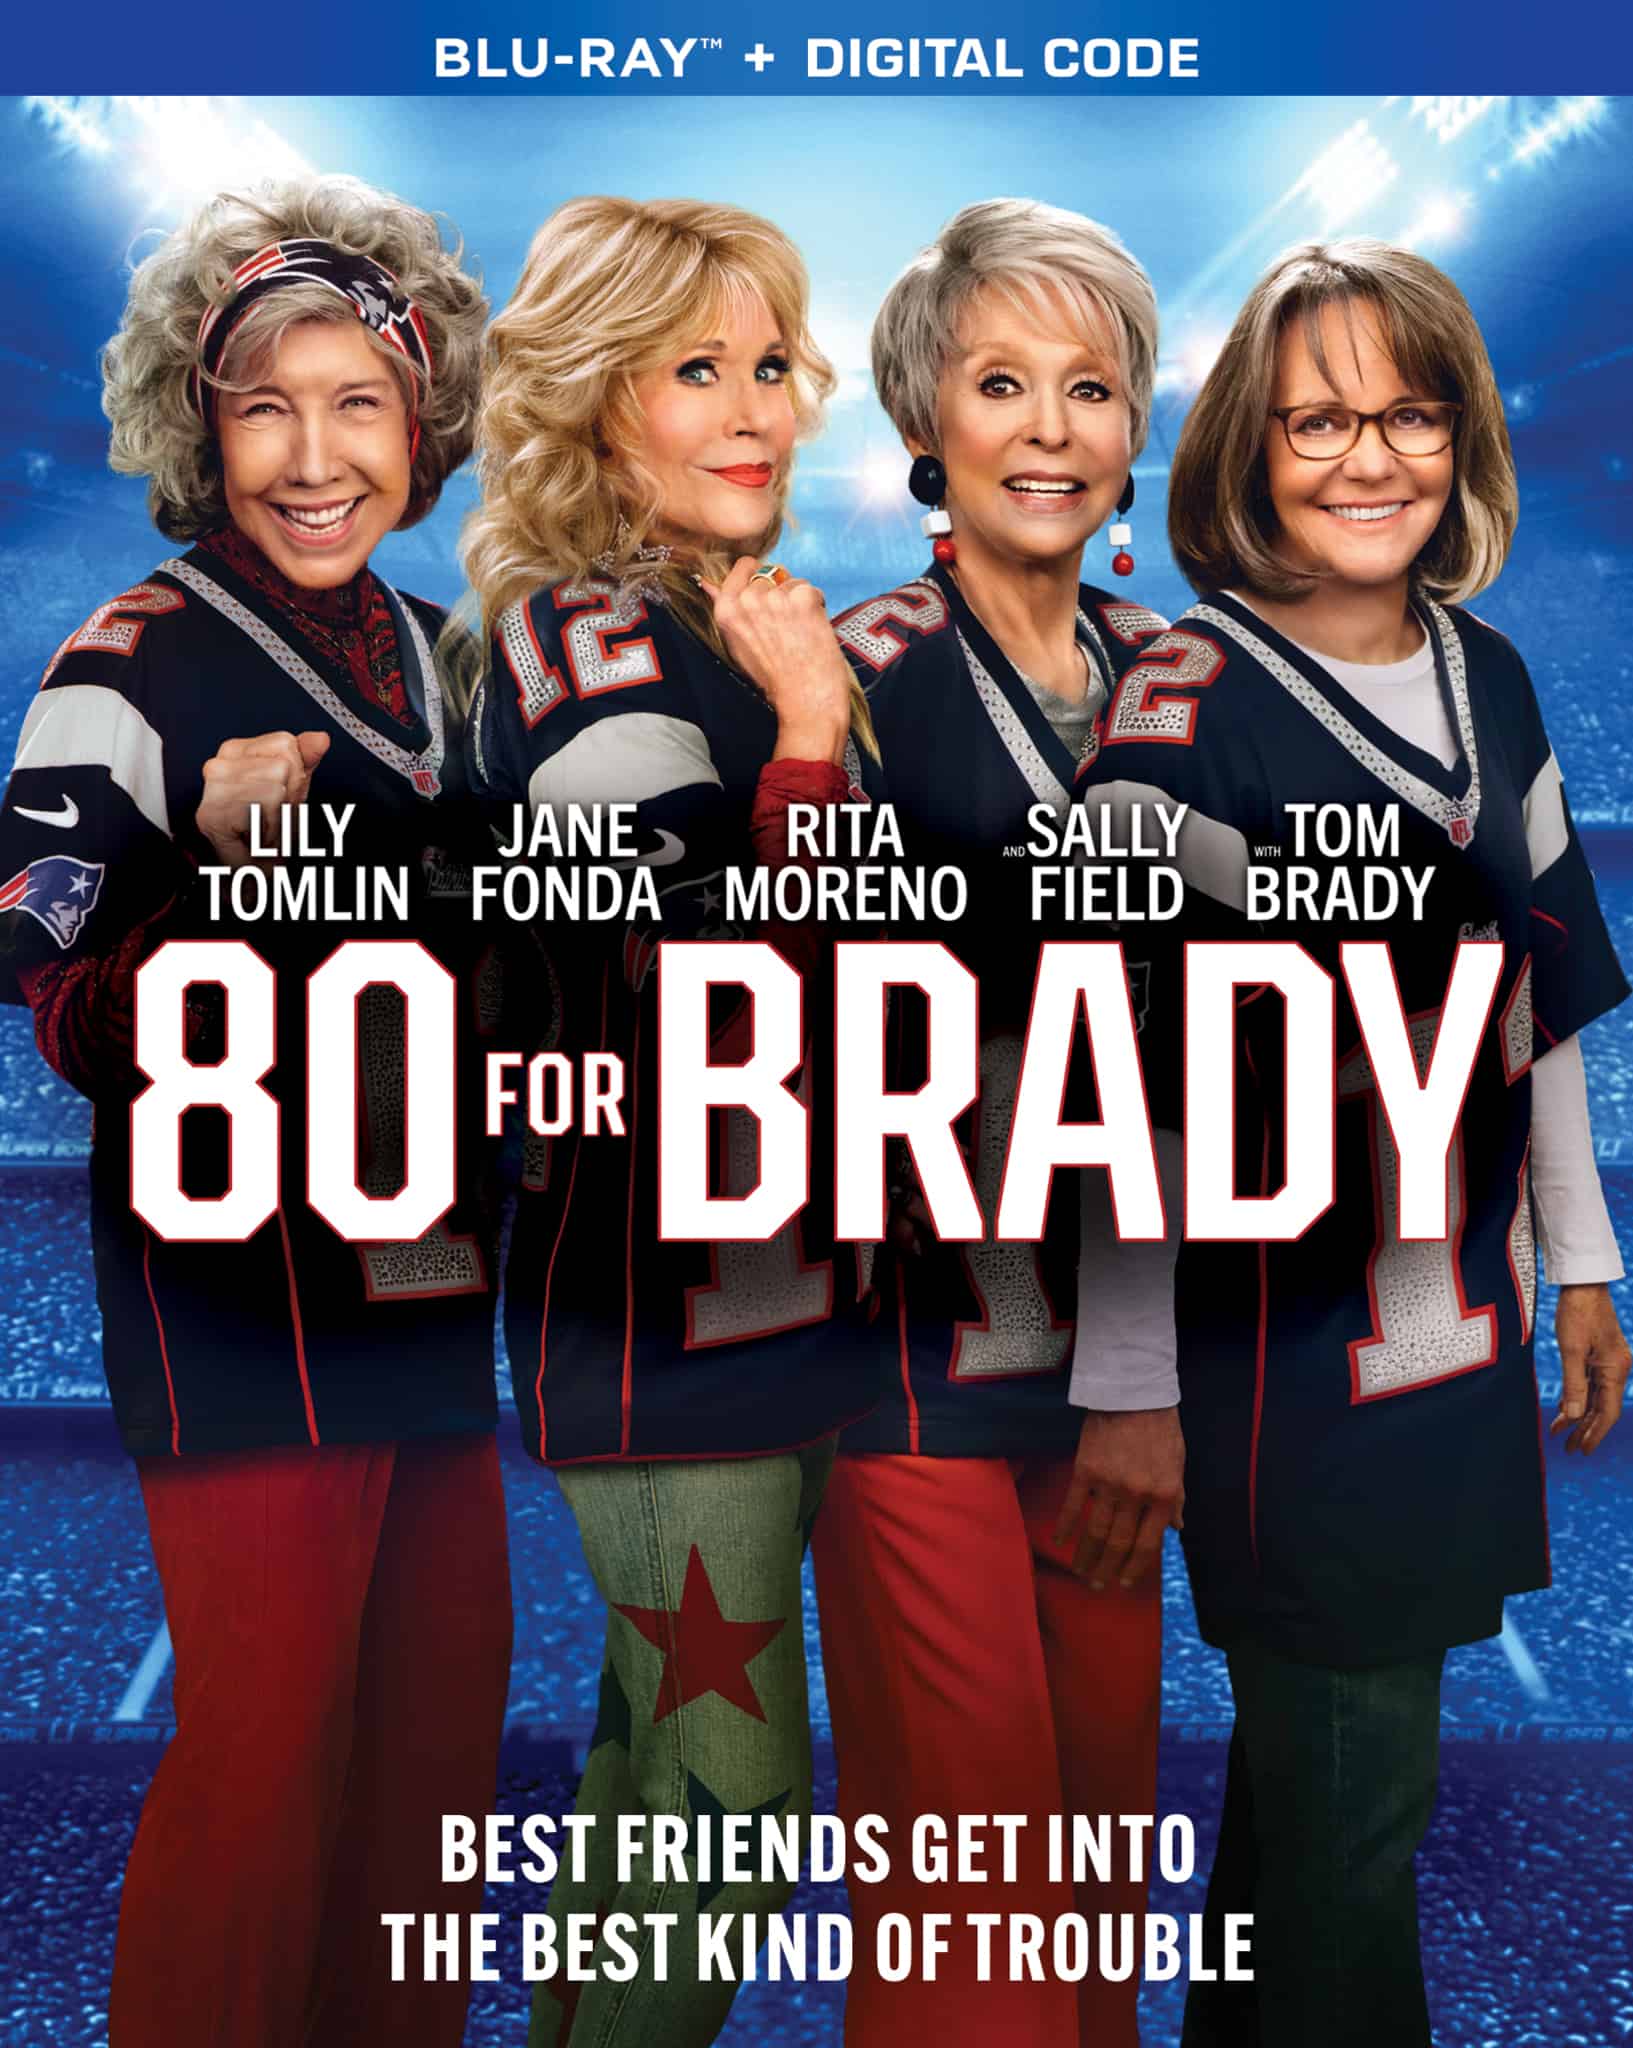 Get Ready for the Ultimate Friendship Adventure with 80 FOR BRADY - Available Now on Digital/PVOD and Coming Soon to Blu-ray/DVD on May 2nd 19